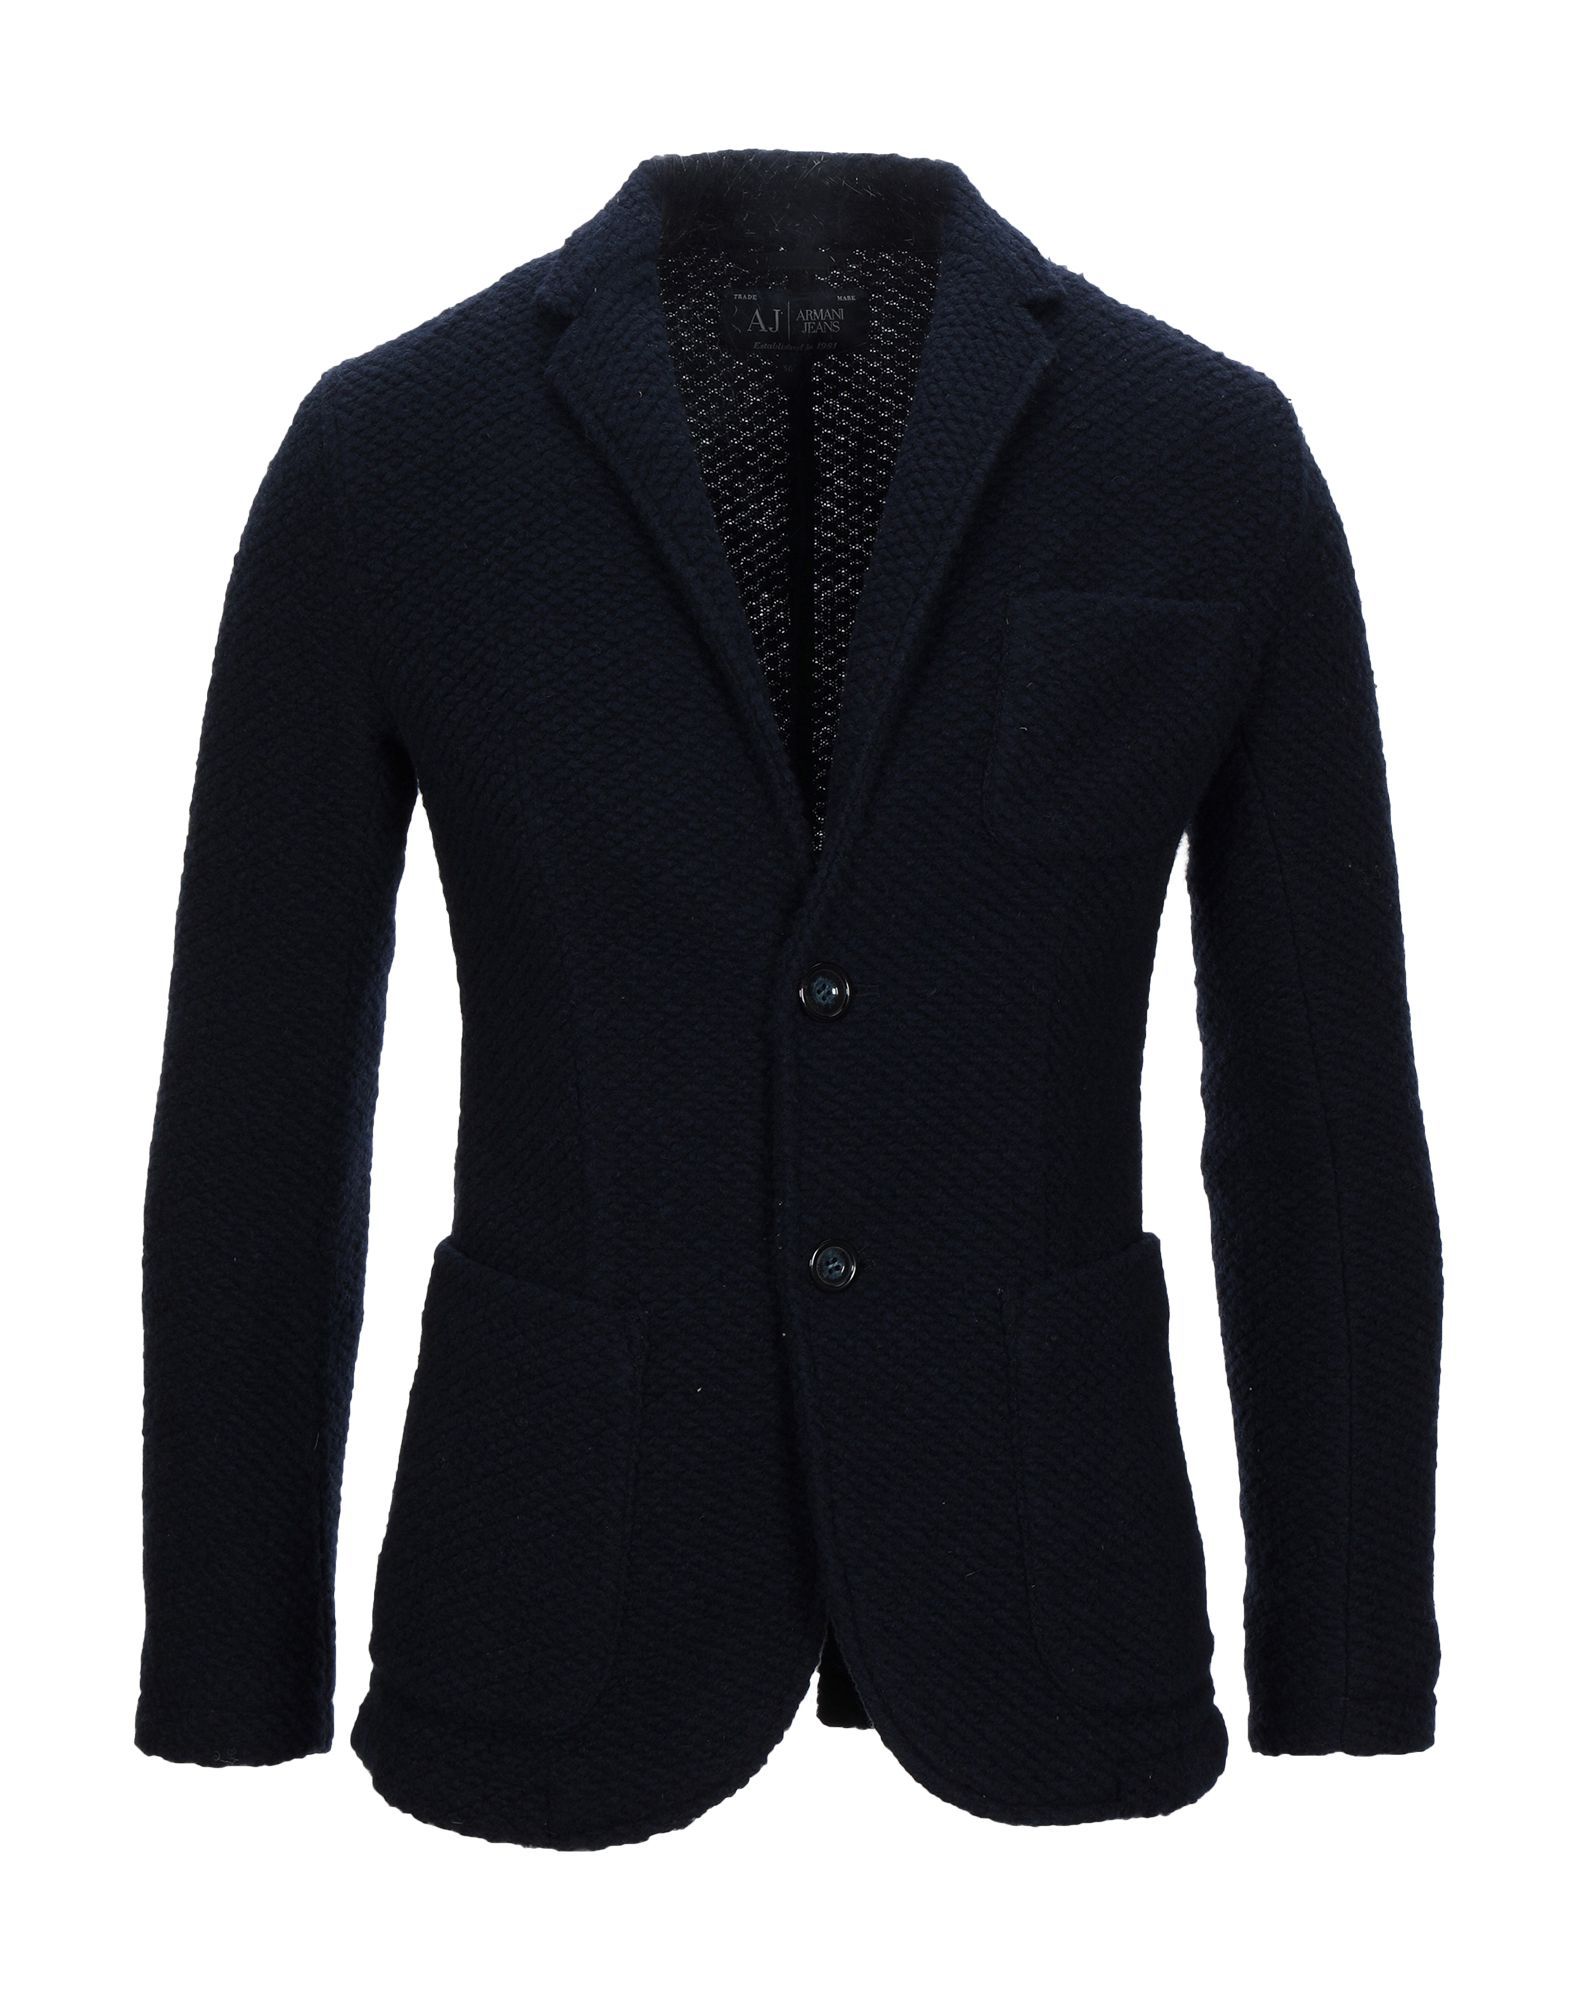 baize, no appliqués, basic solid colour, multipockets, single chest pocket, button closing, lapel collar, single-breasted , long sleeves, unlined